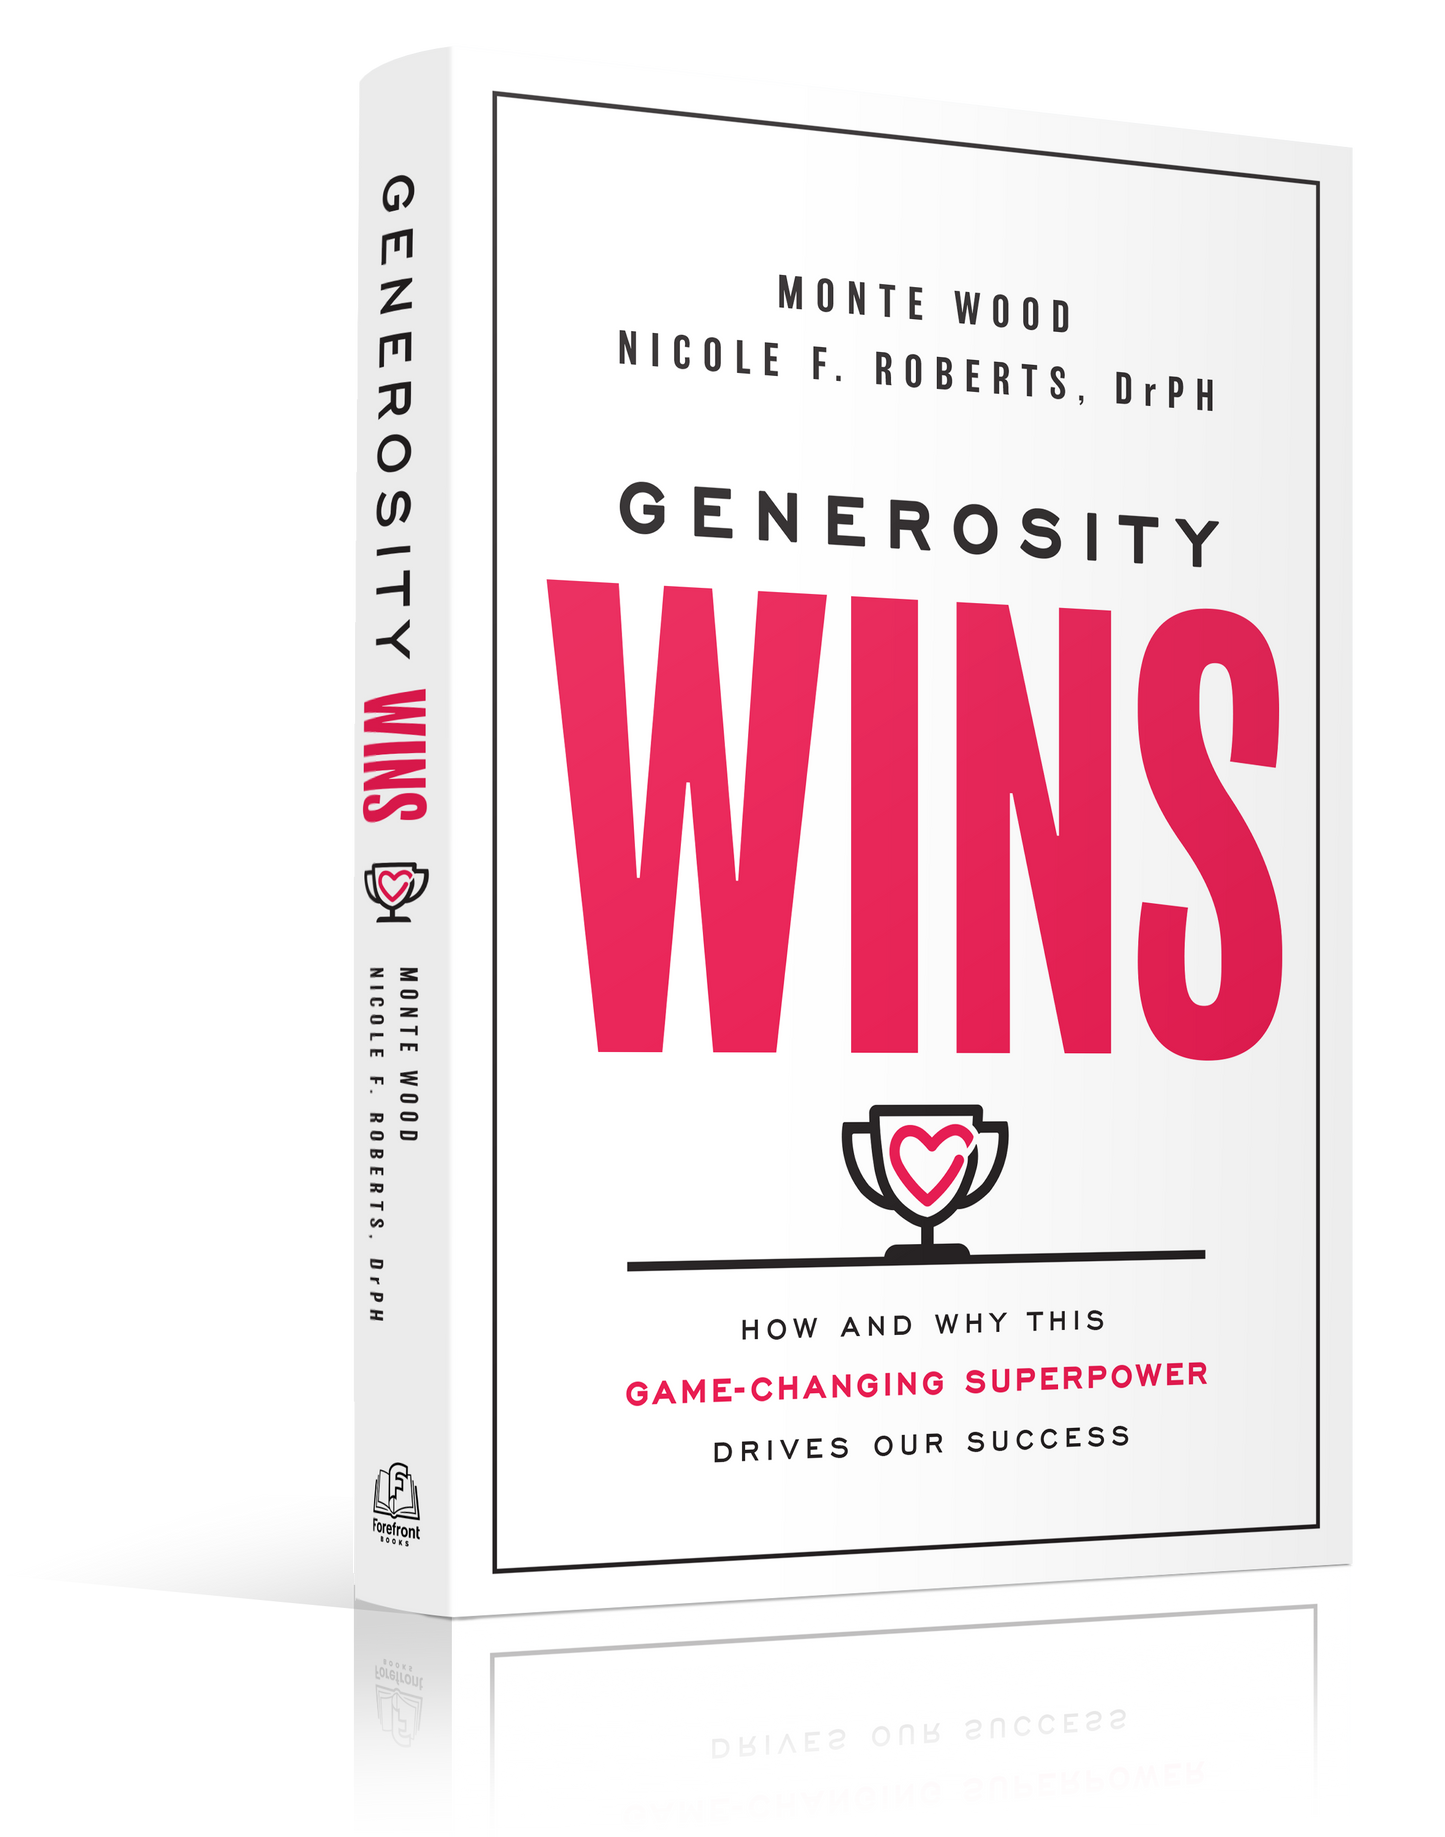 Generosity Wins: How and Why this Game-Changing Superpower Drives Our Success